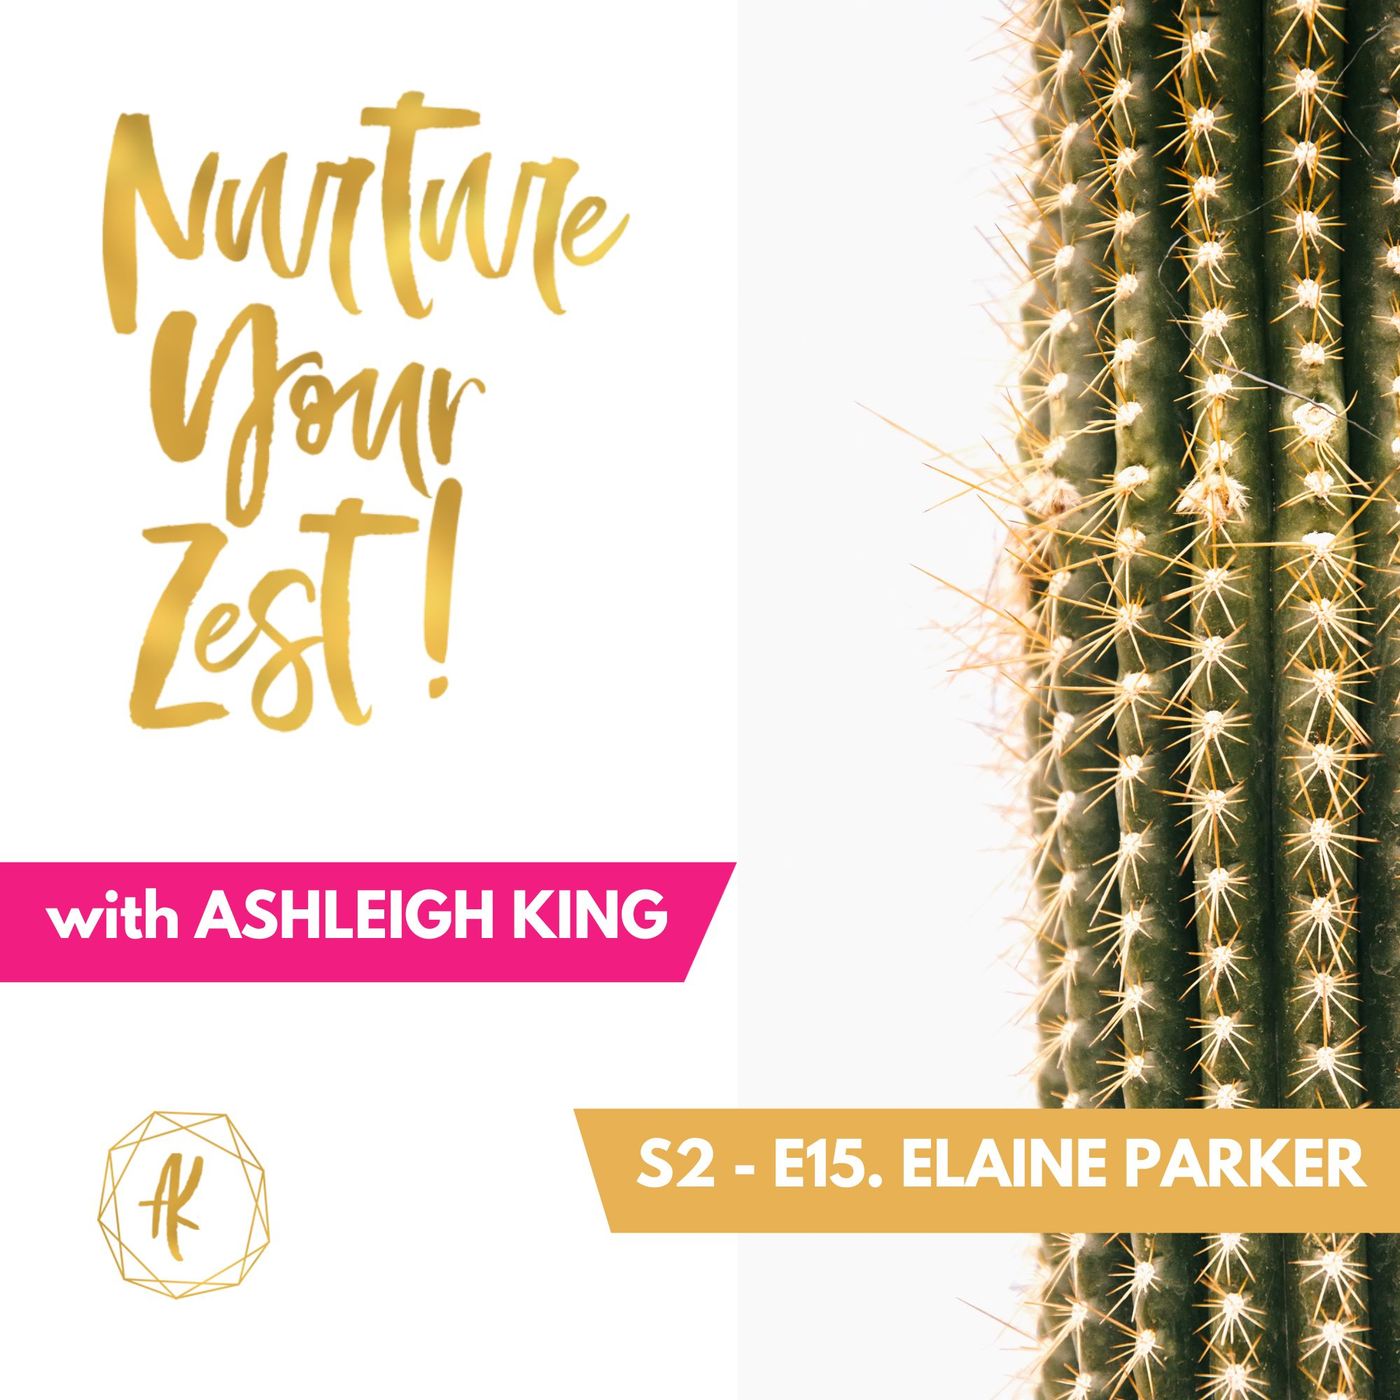 #NurtureYourZest S2-E15. Elaine Parker shares her story about meeting a monster on a dating site, and the birth of Safer Date